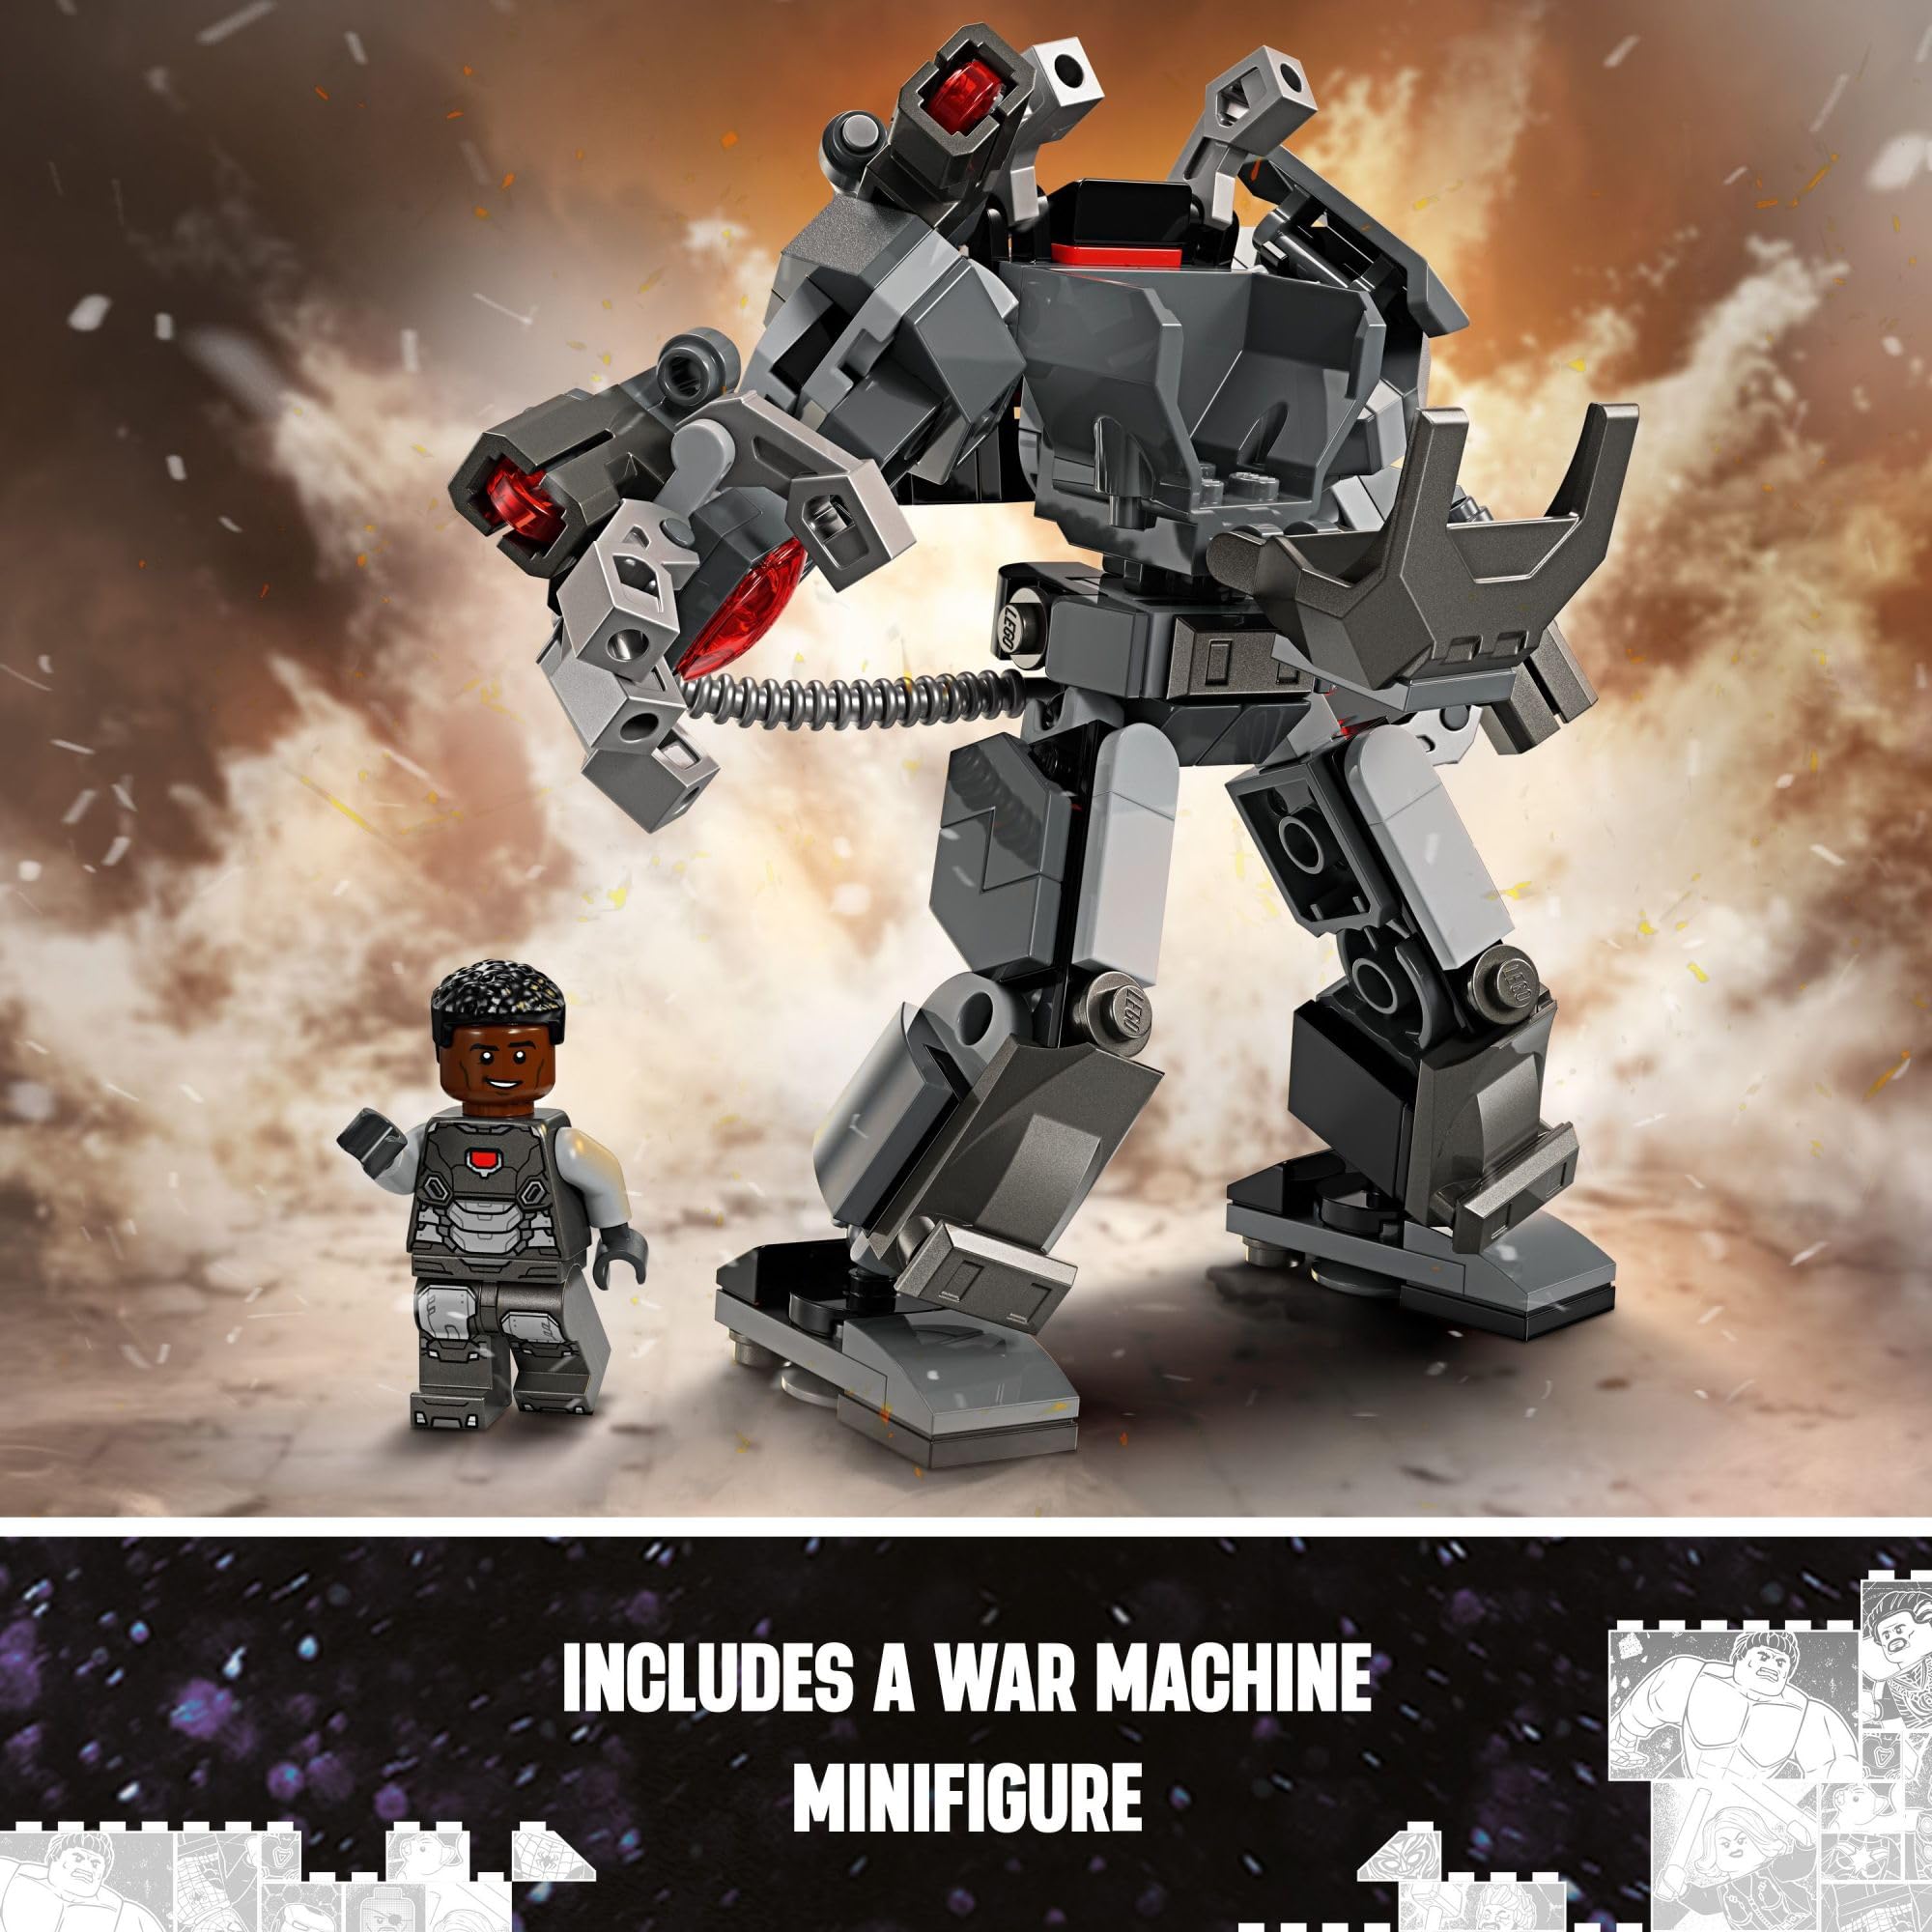 LEGO Marvel War Machine Mech Armor, Buildable Marvel Action Figure Toy for Kids with 3 Stud Shooters, Legendary Character from The MCU, Marvel Gift for Boys and Girls Aged 6 and Up, 76277